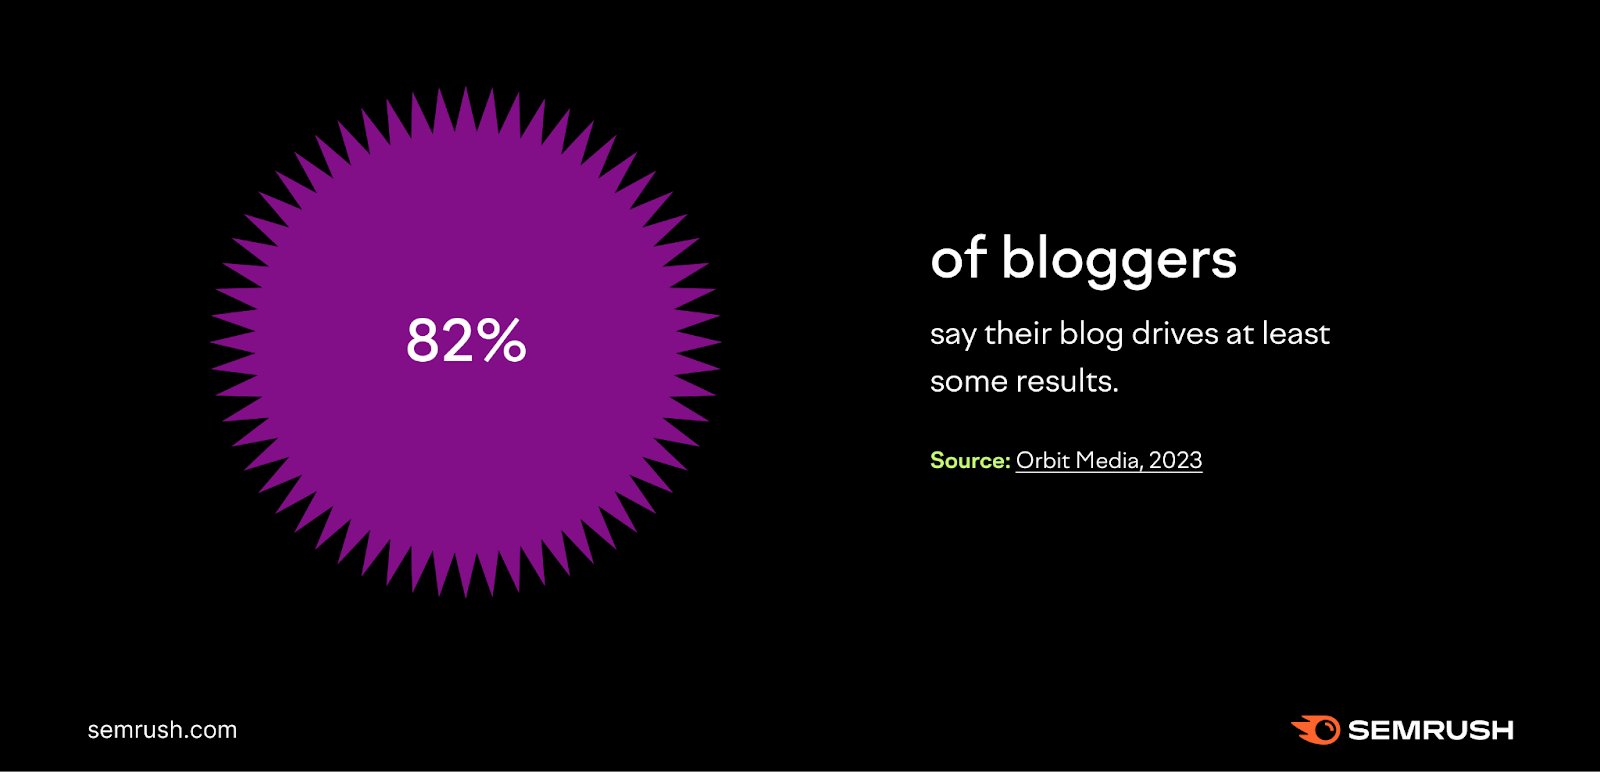 82% of bloggers say their blog drives at least some results.